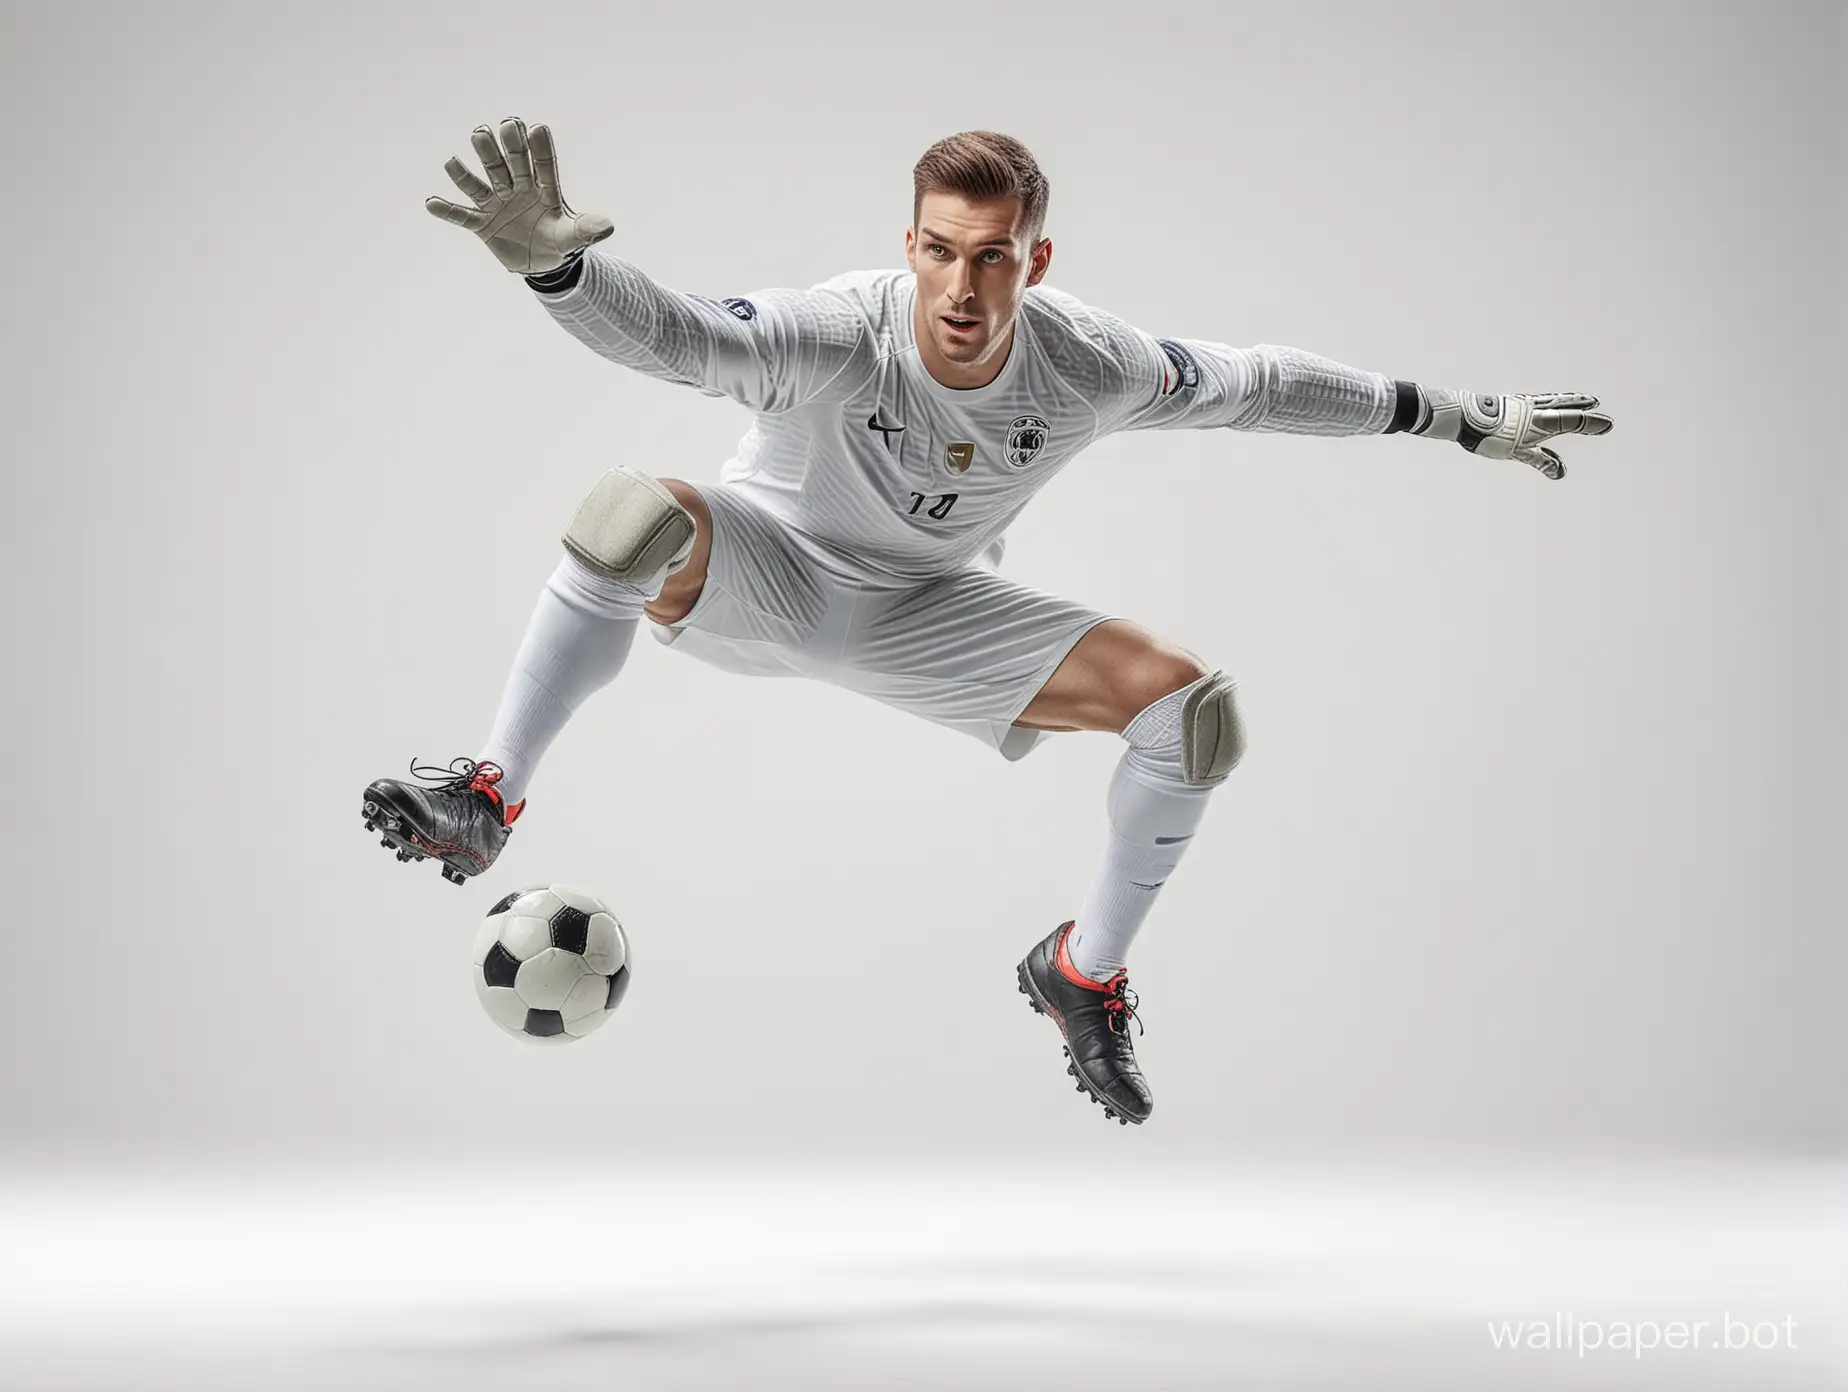 The soccer goalkeeper jumps to deflect the ball. character. high detail. white background